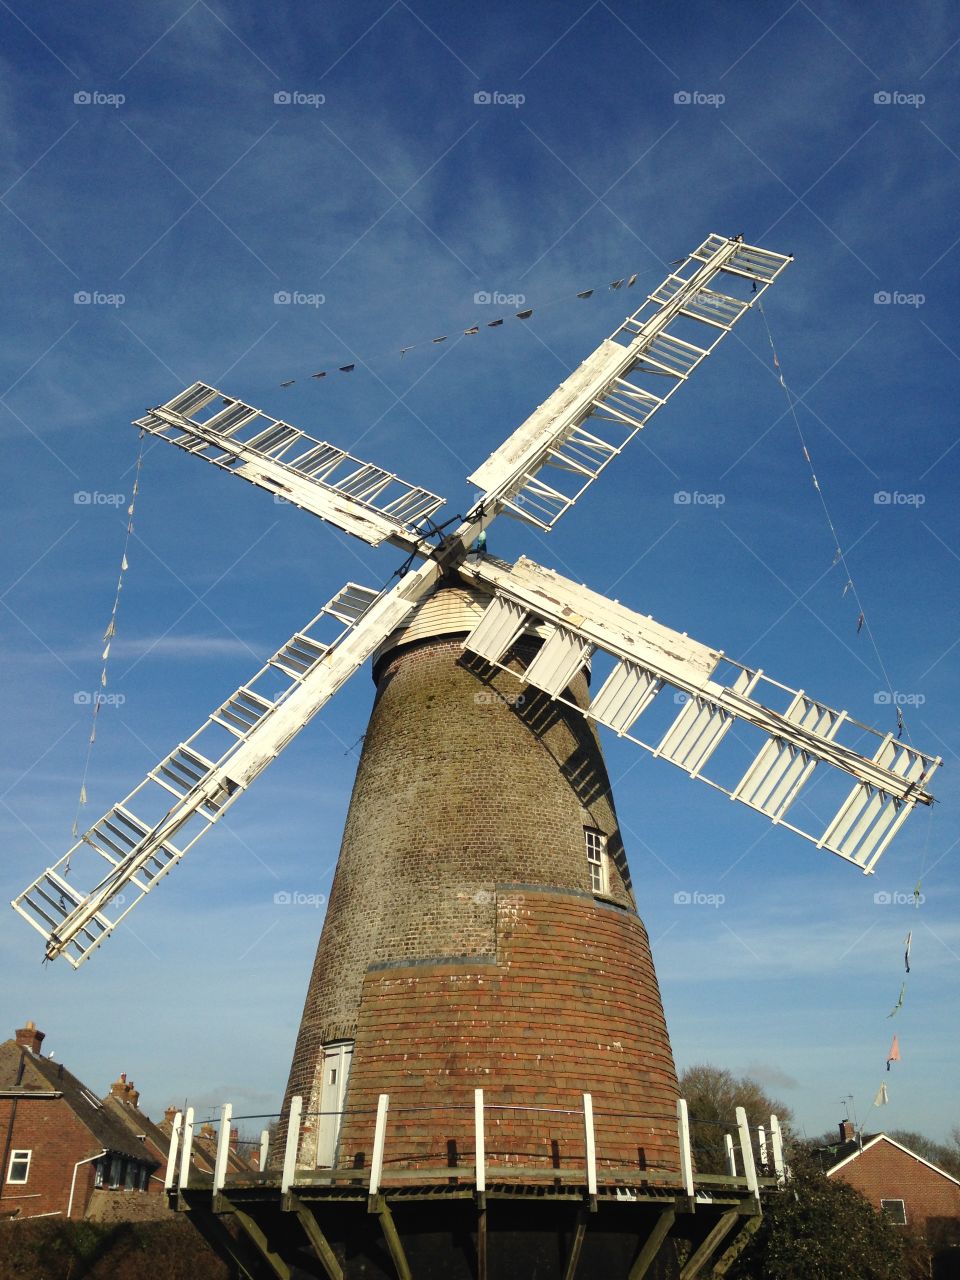 A local Sussex windmill that I intend to visit more often and learn about it's history